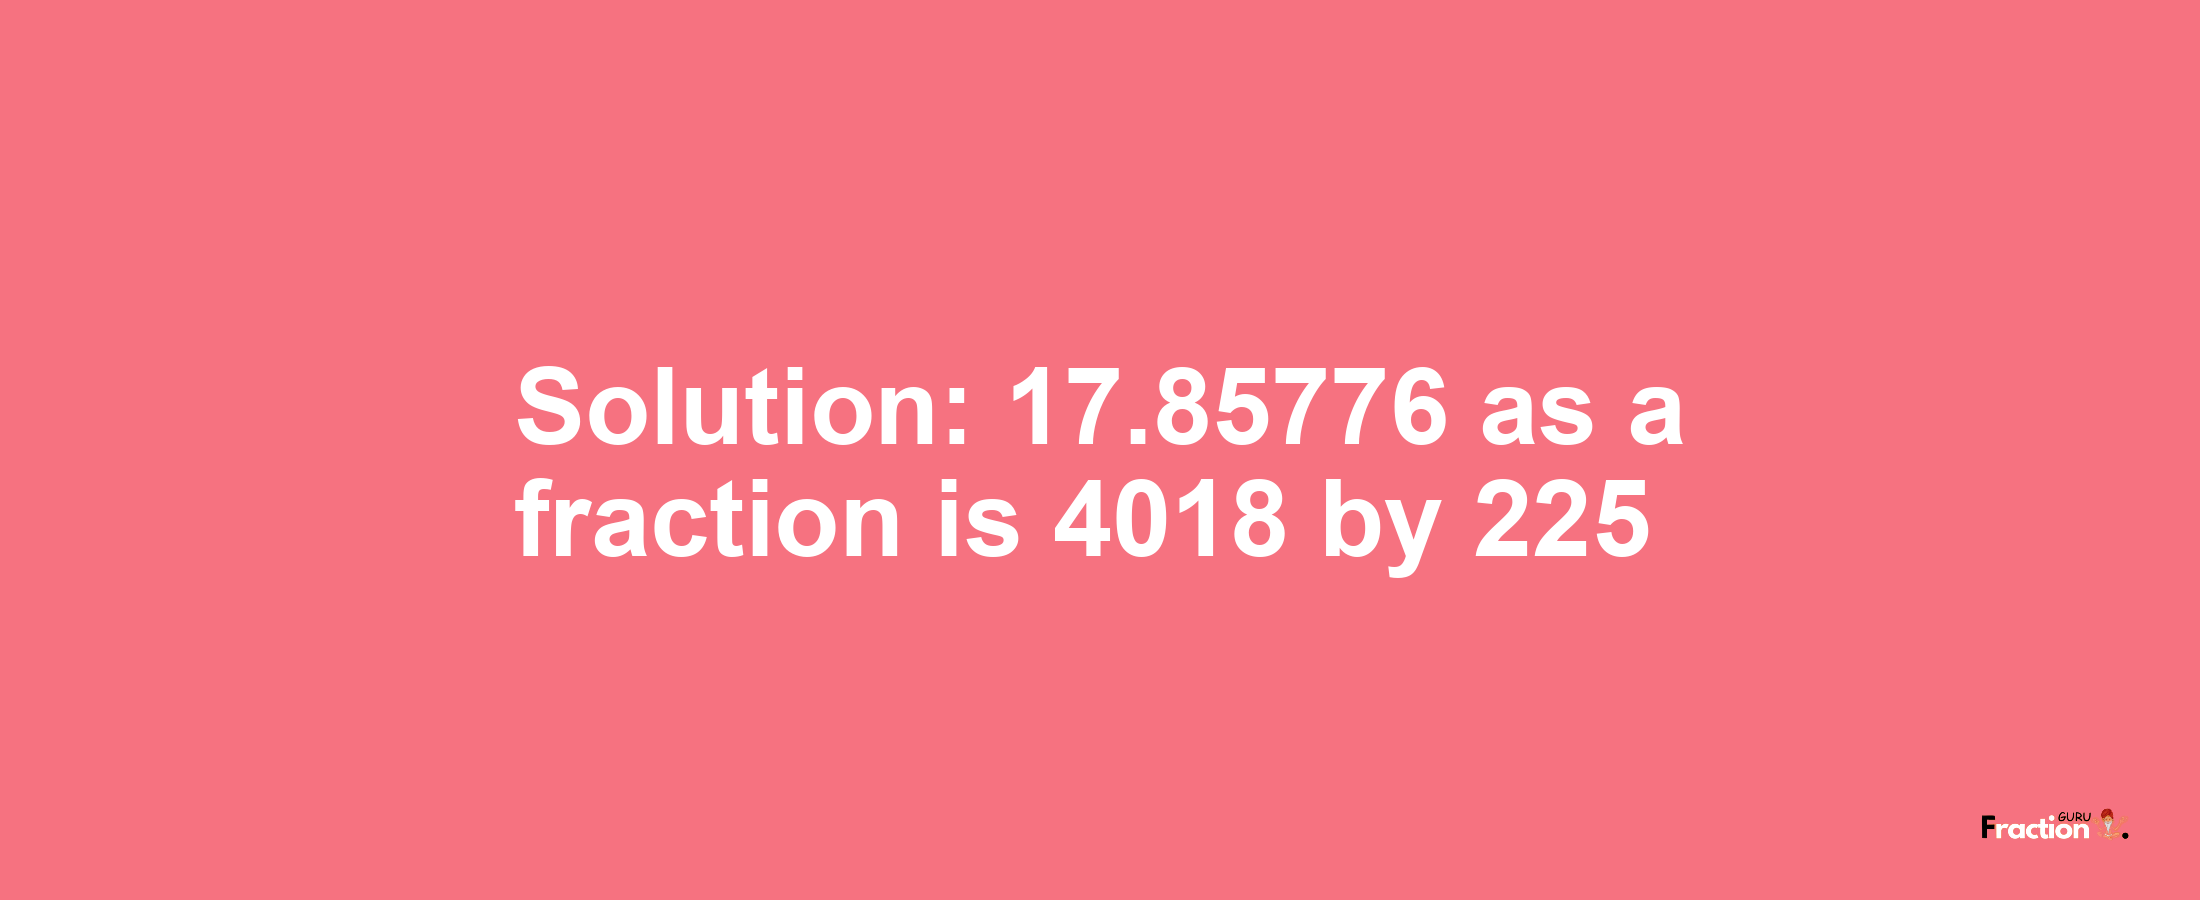 Solution:17.85776 as a fraction is 4018/225